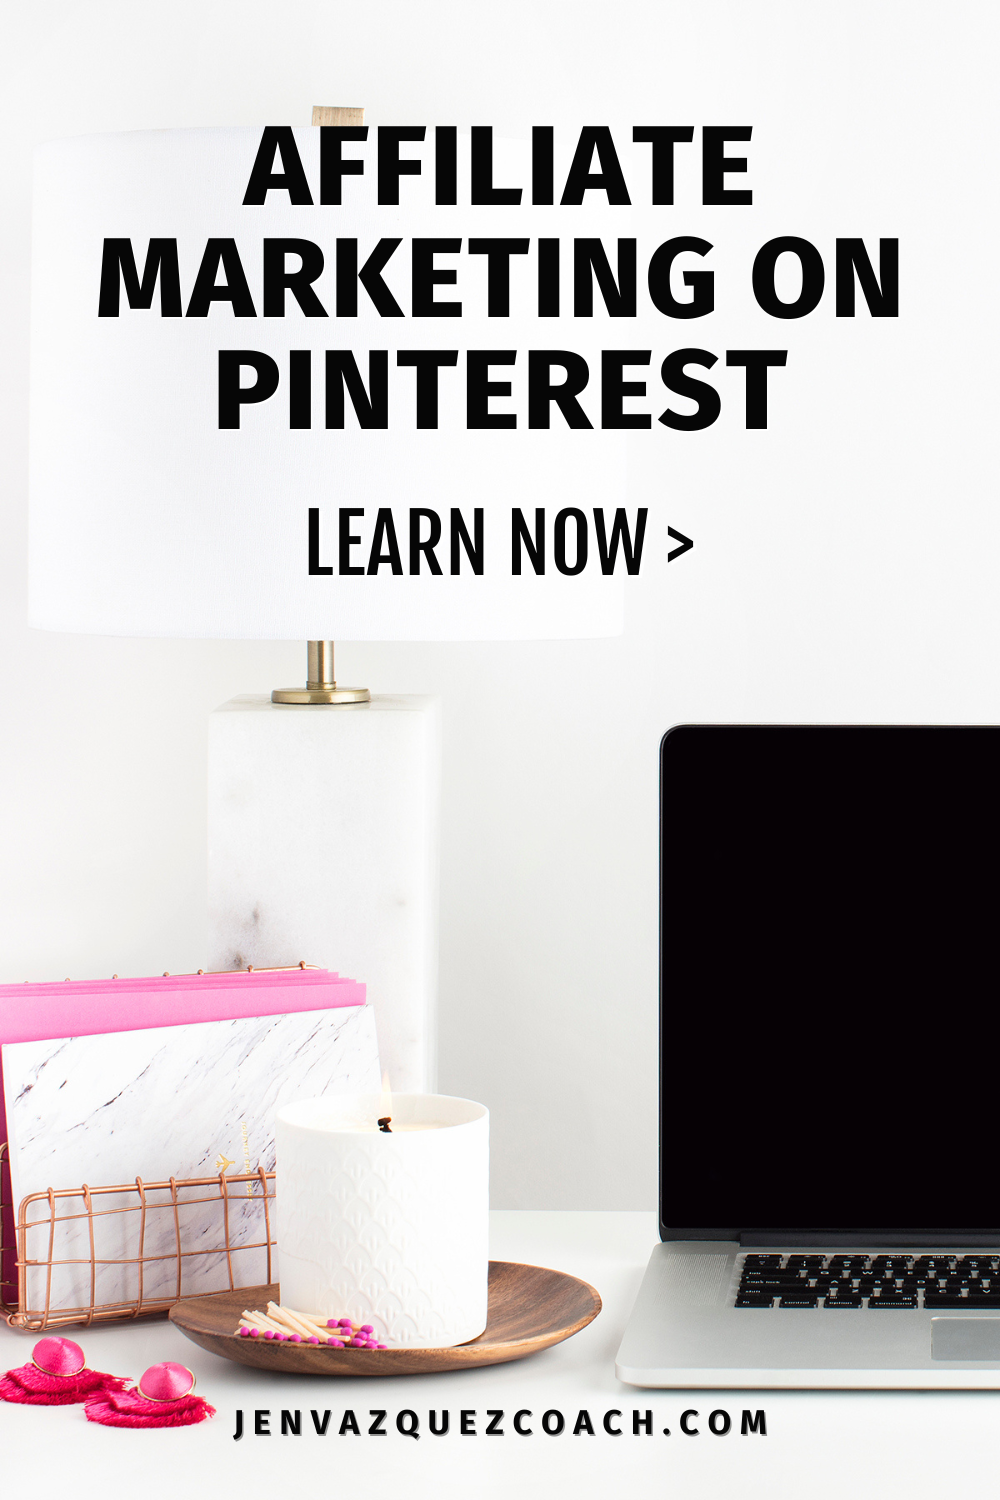 Today, we're jumping into the fabulous world of affiliate marketing on Pinterest. Whether you're a newbie or a seasoned pro, it's time to forget what you think you know about affiliate marketing and embrace a fresh, more genuine approach.  by Jen Vazquez Media jenvazquezcoach.com